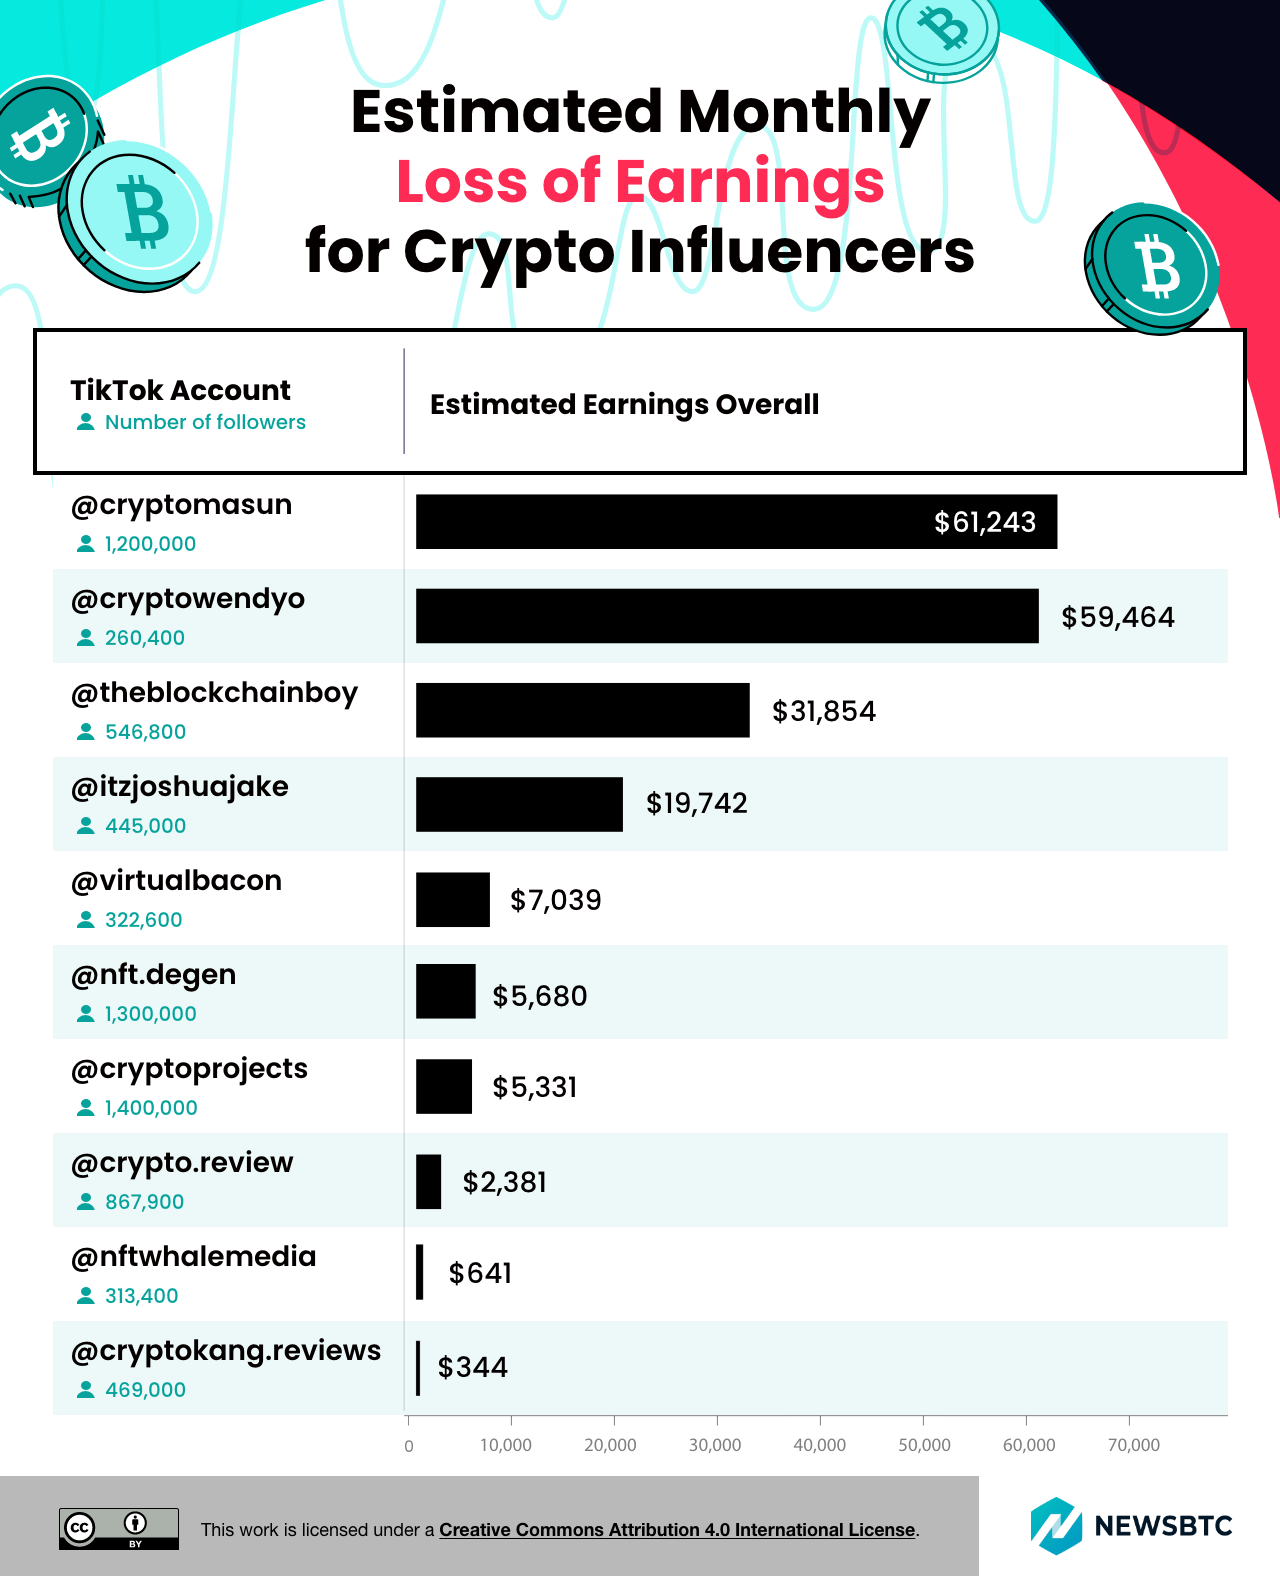 Estimated monthly loss of earnings for crypto influencers